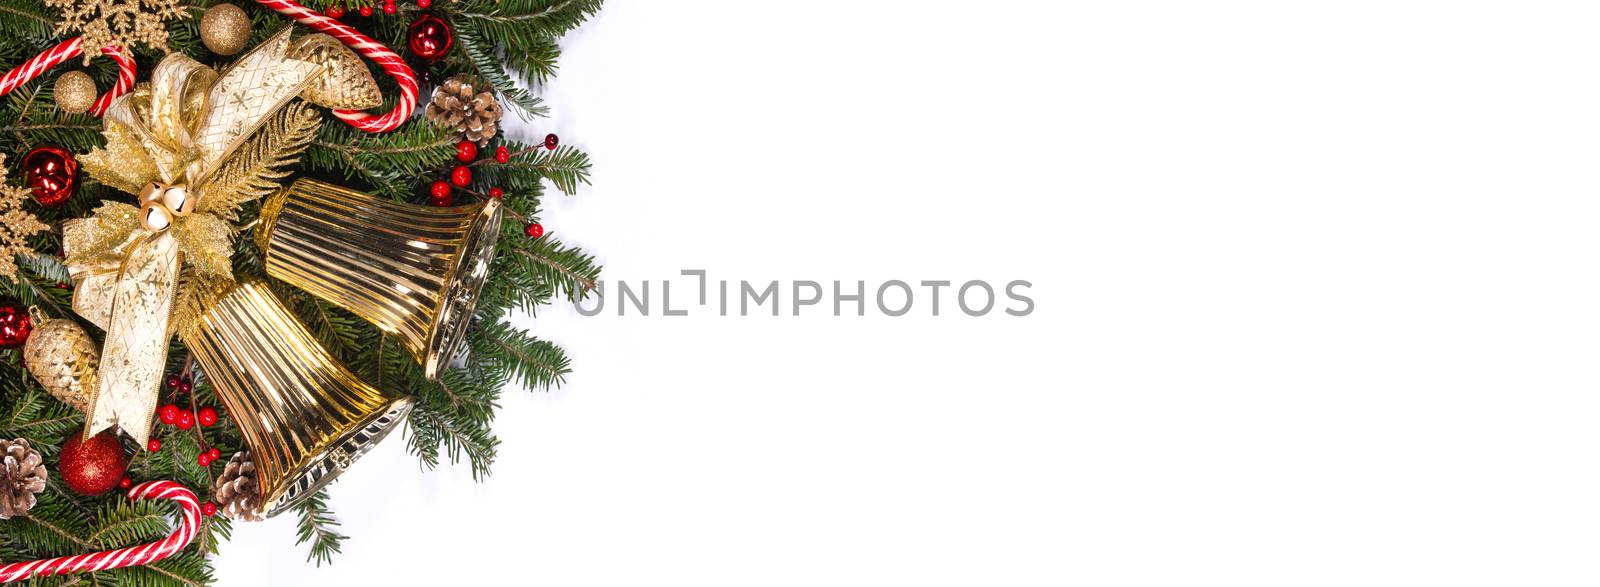 New Year and Christmas composition design isolated on white background, fir tree branches jingle bells golden and red decorative baubles and pine cones traditional design